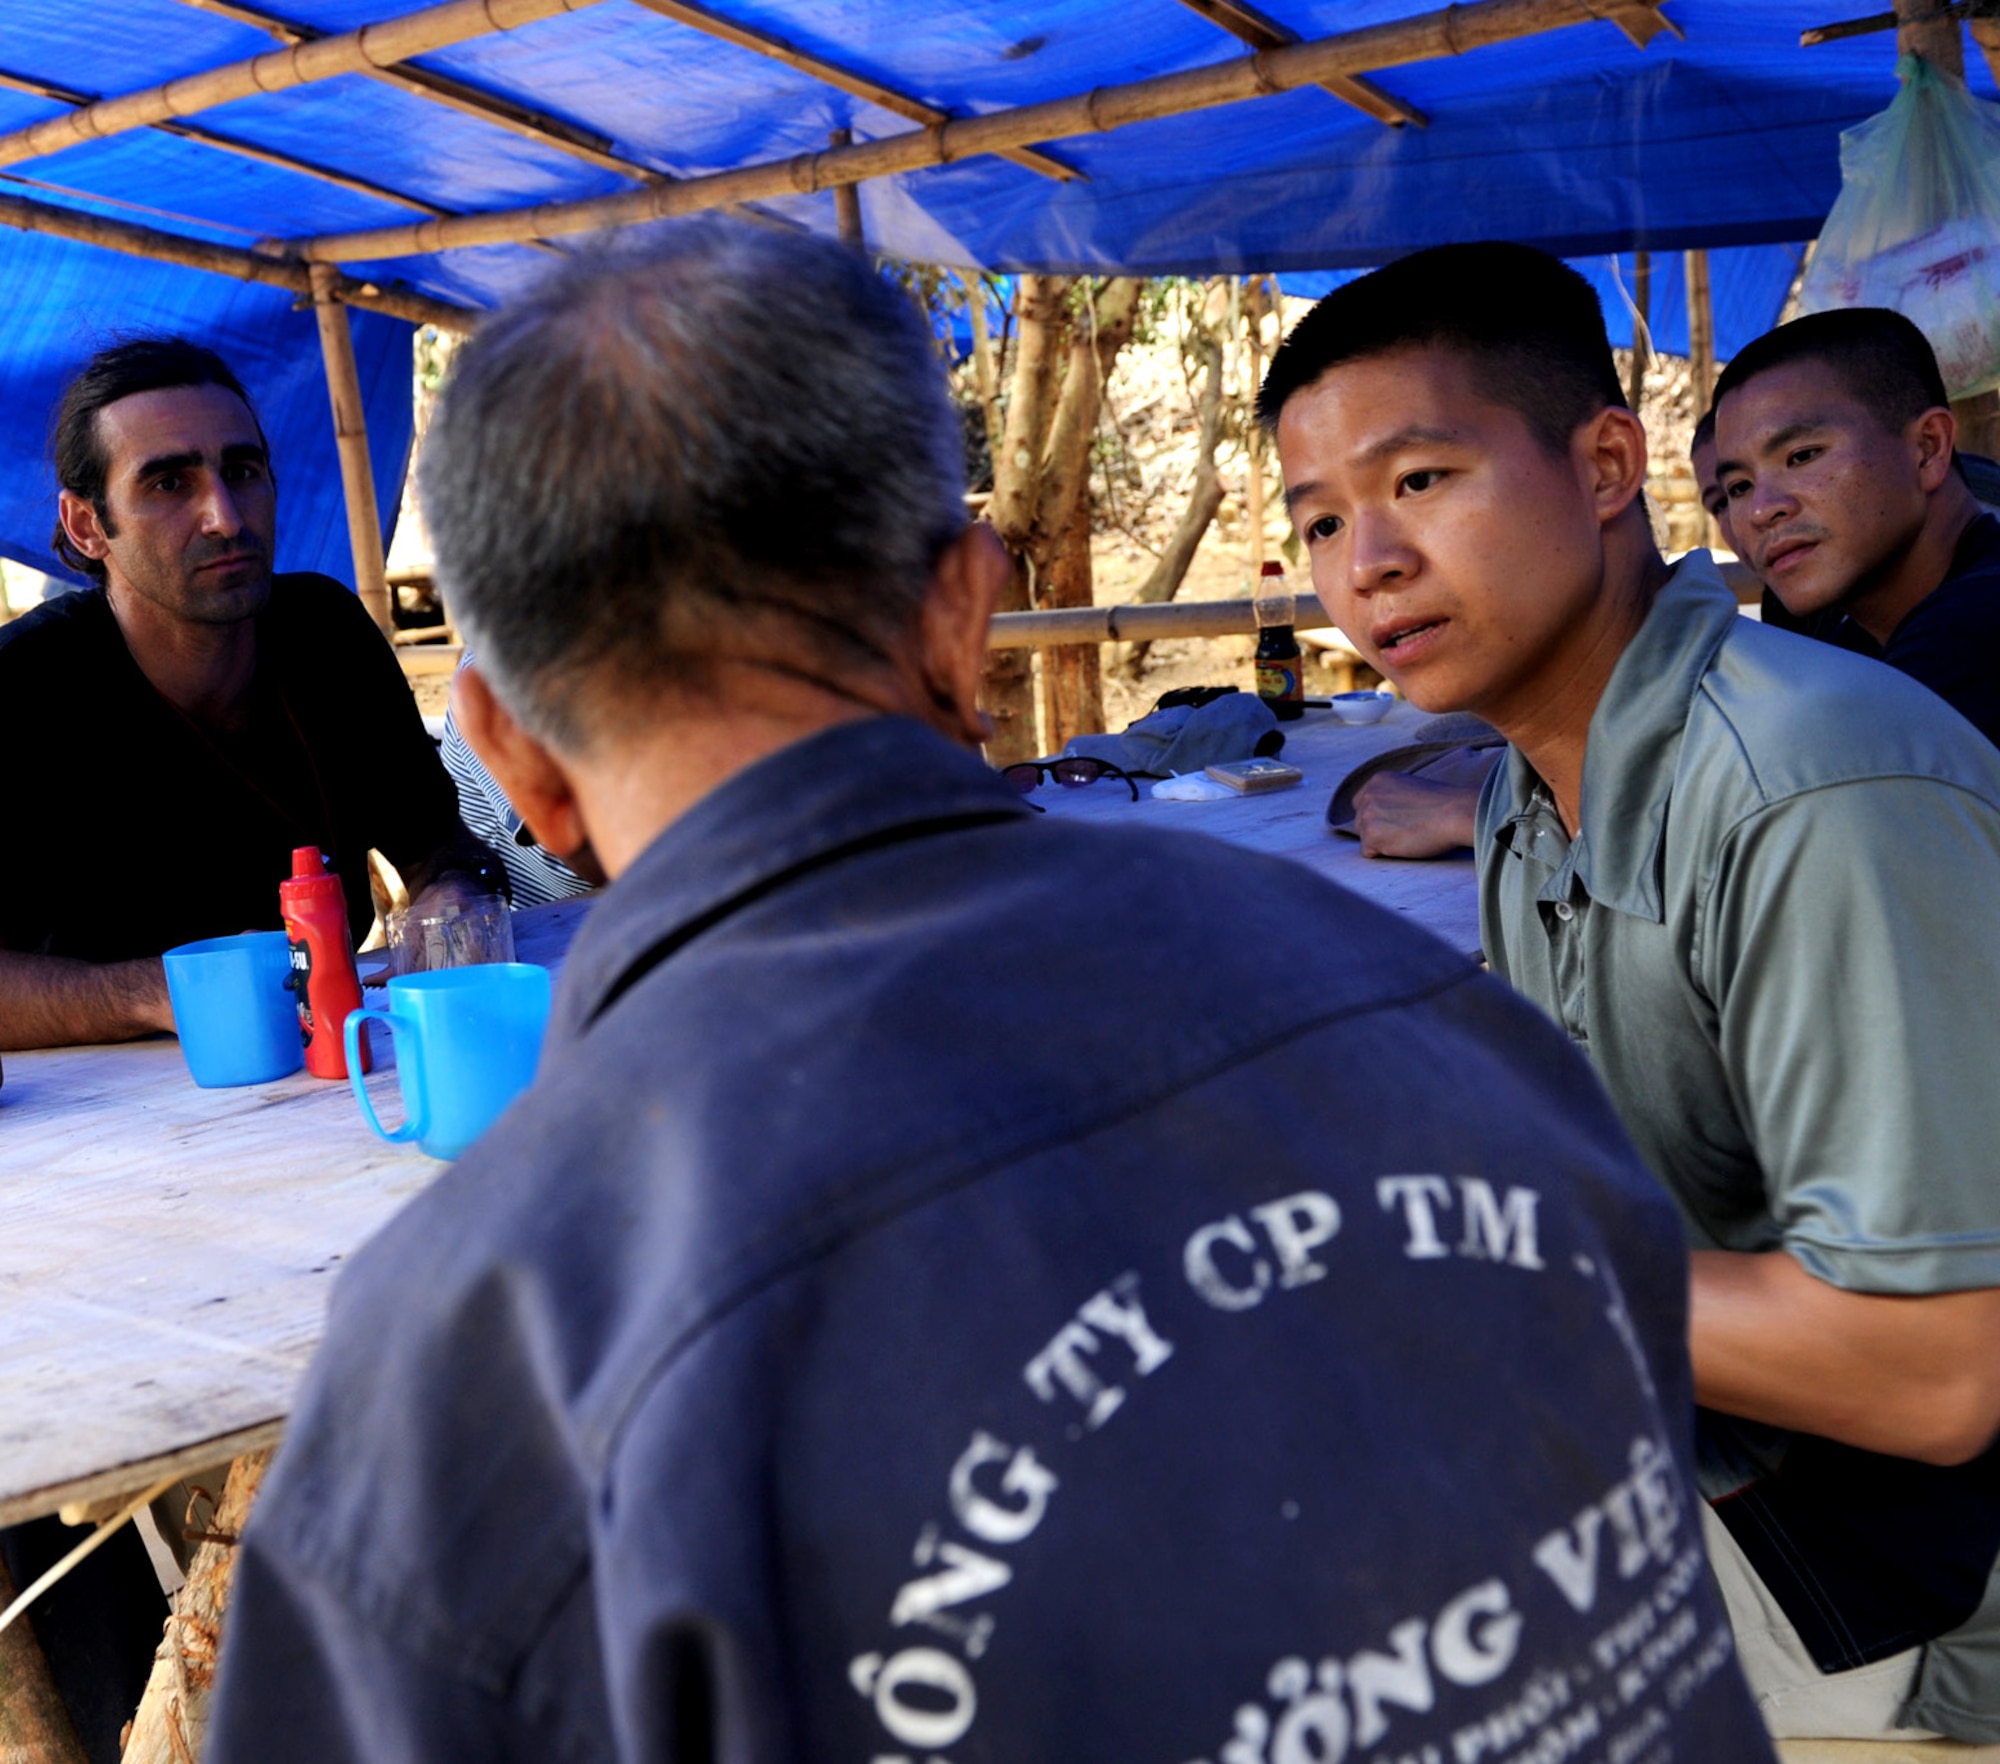 Capt. Huy Tran, an officer stationed at Grand Forks AFB, N.D., interviews a witness in Vietnam during a search and recovery mission in the summer of 2012. In cooperation with the Joint Prisoners of War/Missing in Action Accounting Command, (JPAC), and the Language Enabled Airman Program (LEAP), Tran played a vital role as a Vietnamese linguist on a recovery mission to bring home service members missing from the Vietnam War Era. (Courtesy photo)